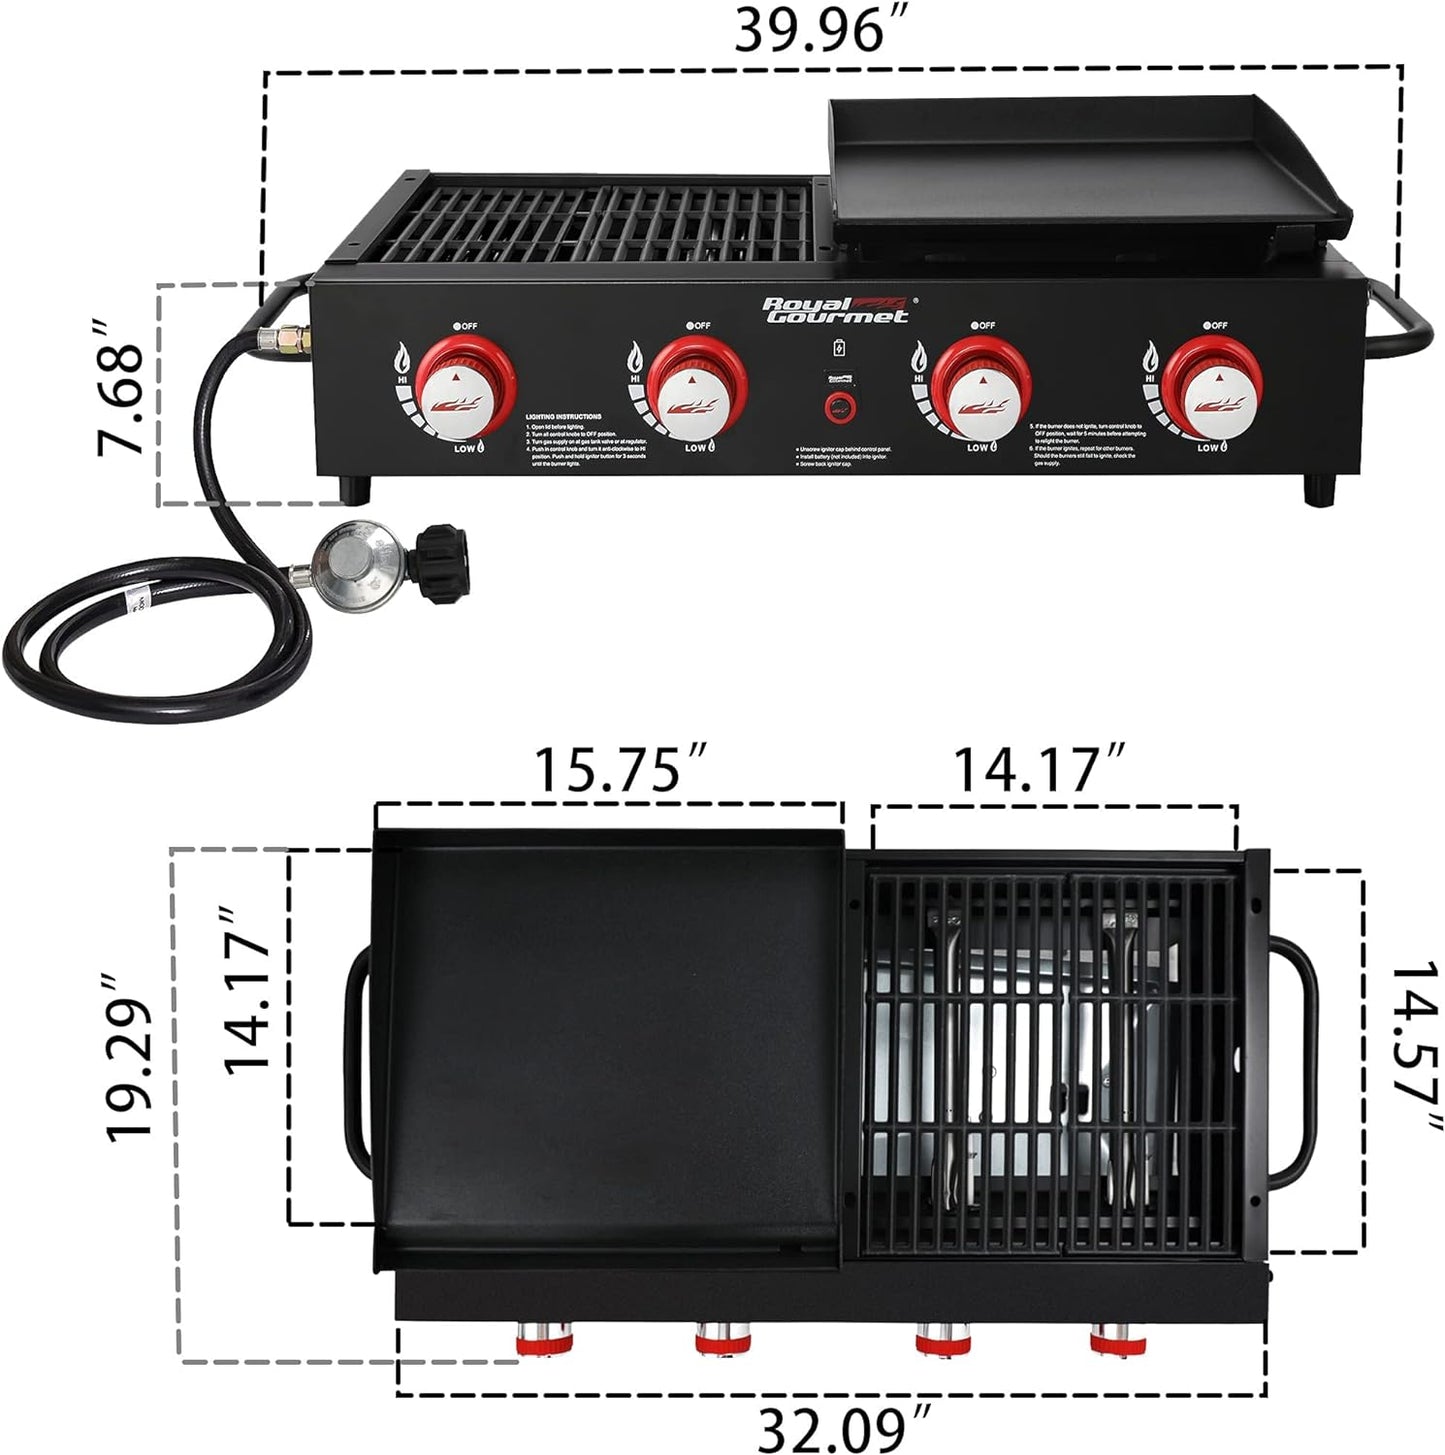 GD4002T 4-Burner Tailgater Grill & Griddle Combo, Portable Propane Gas Grill and Griddle, 2-In-1 Combo Design for Backyard or Outdoor BBQ Cooking, 40,000 BTU, Black